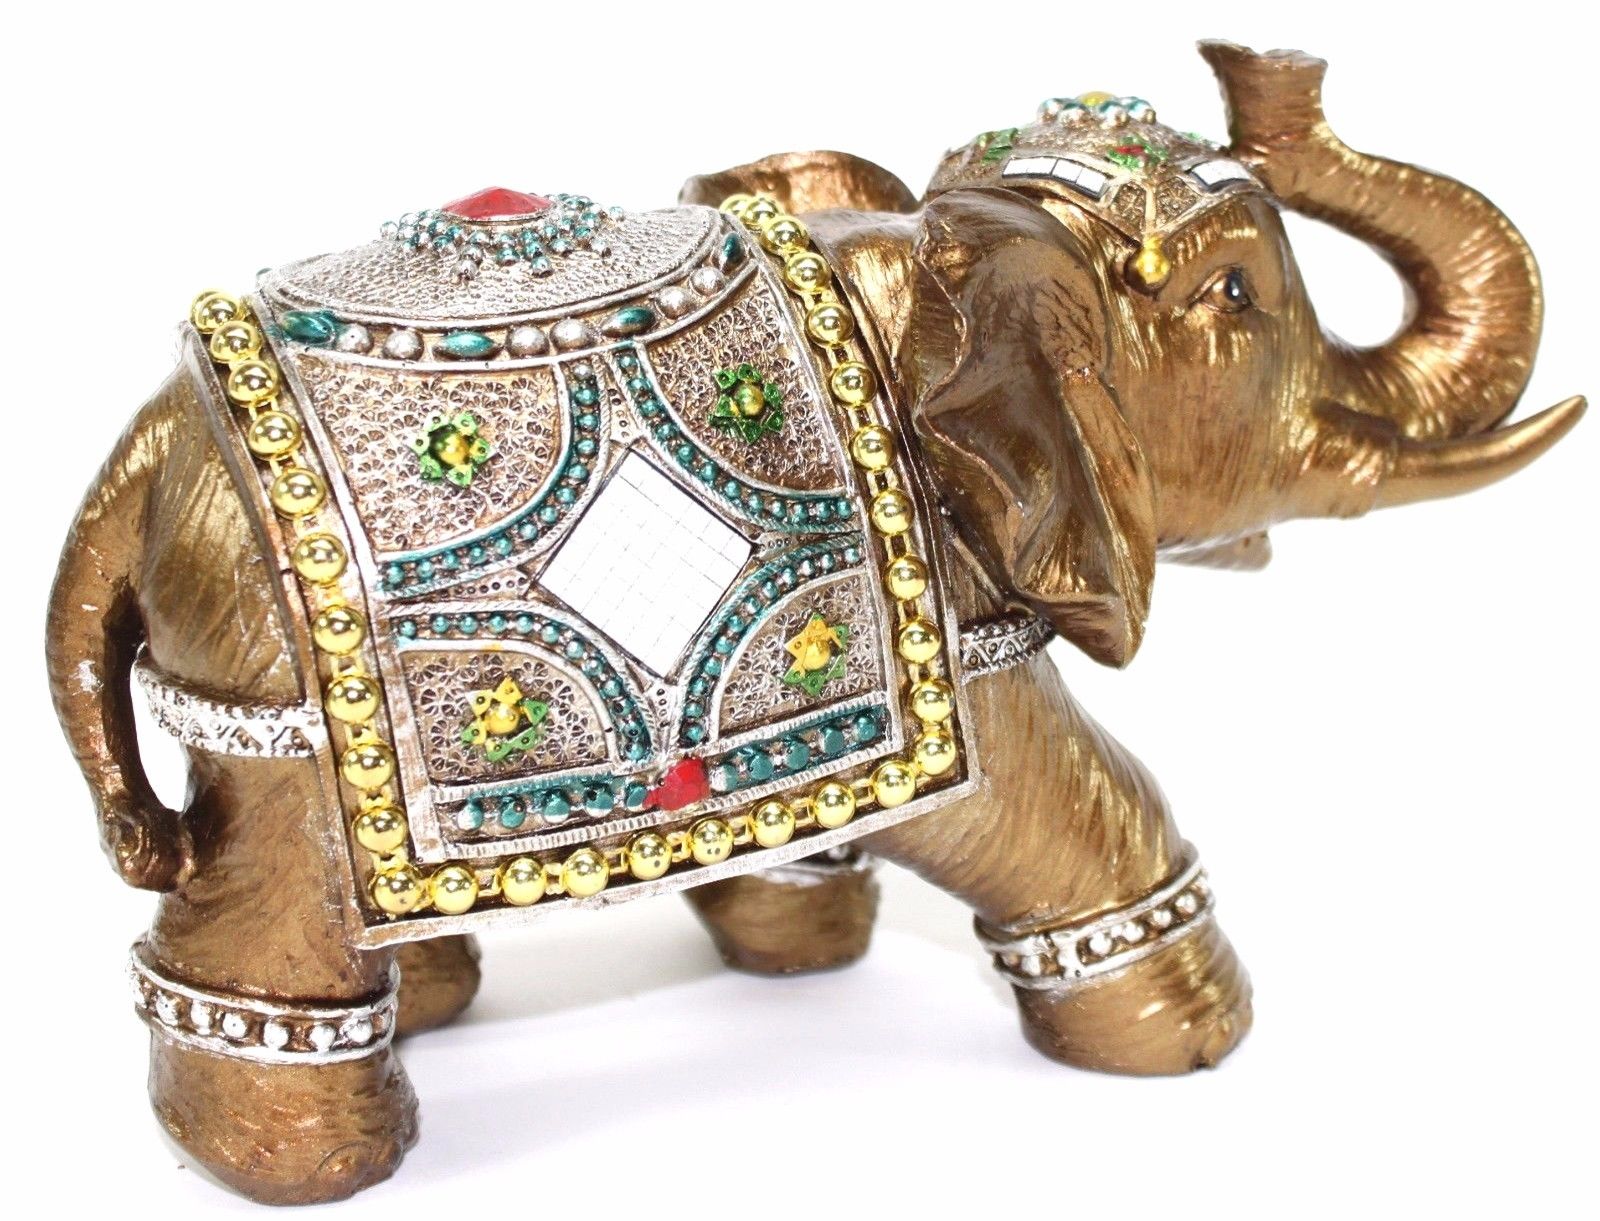 Feng Shui 7" Medium Gold Color Elegant Elephant Trunk Statue Lucky Figurine House Warming Gift & Home Decor - image 3 of 3